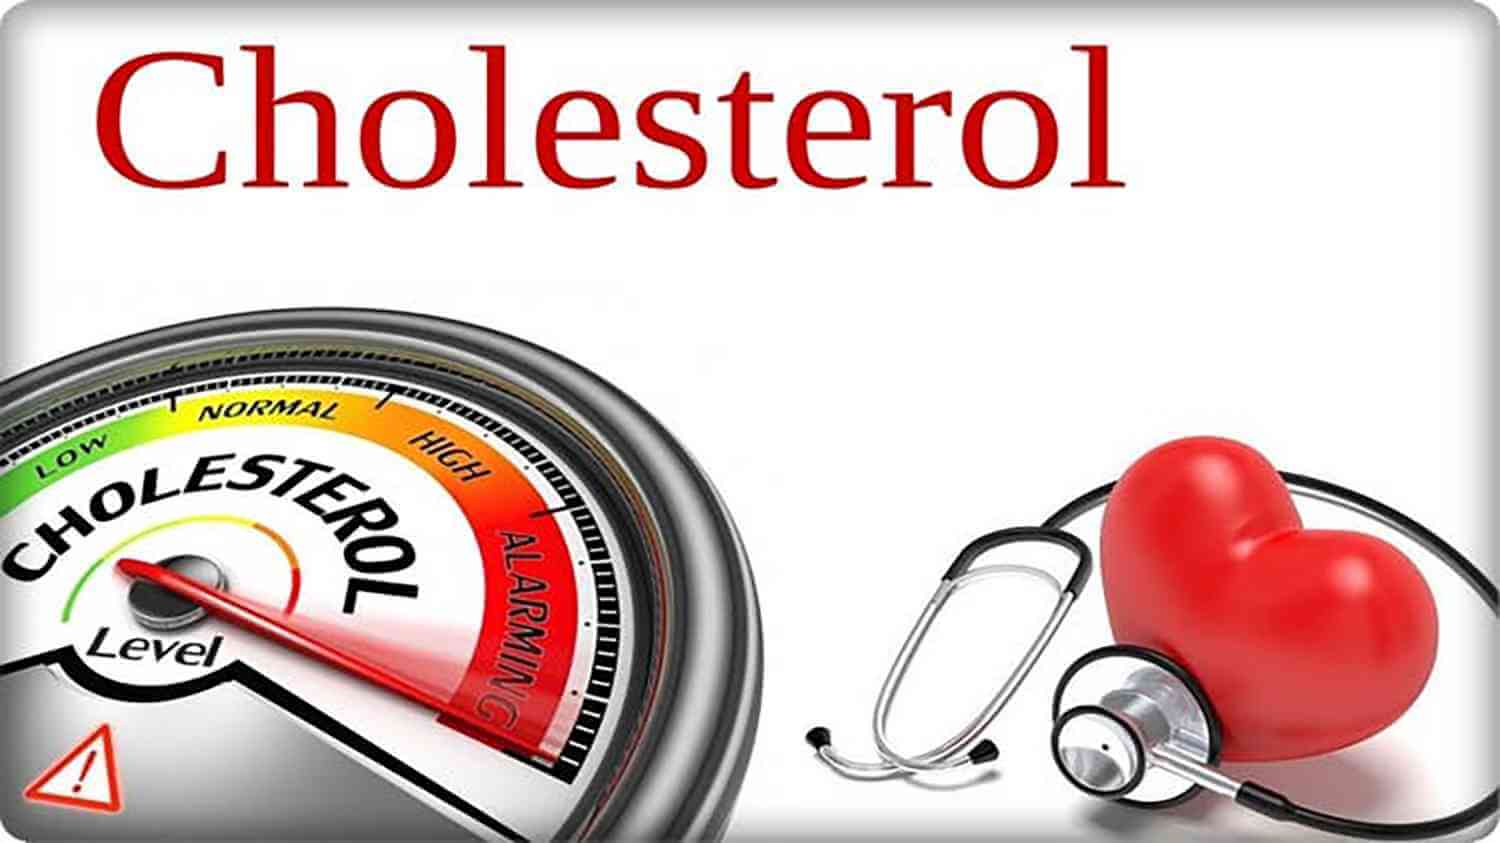 The link between dietary and blood cholesterol